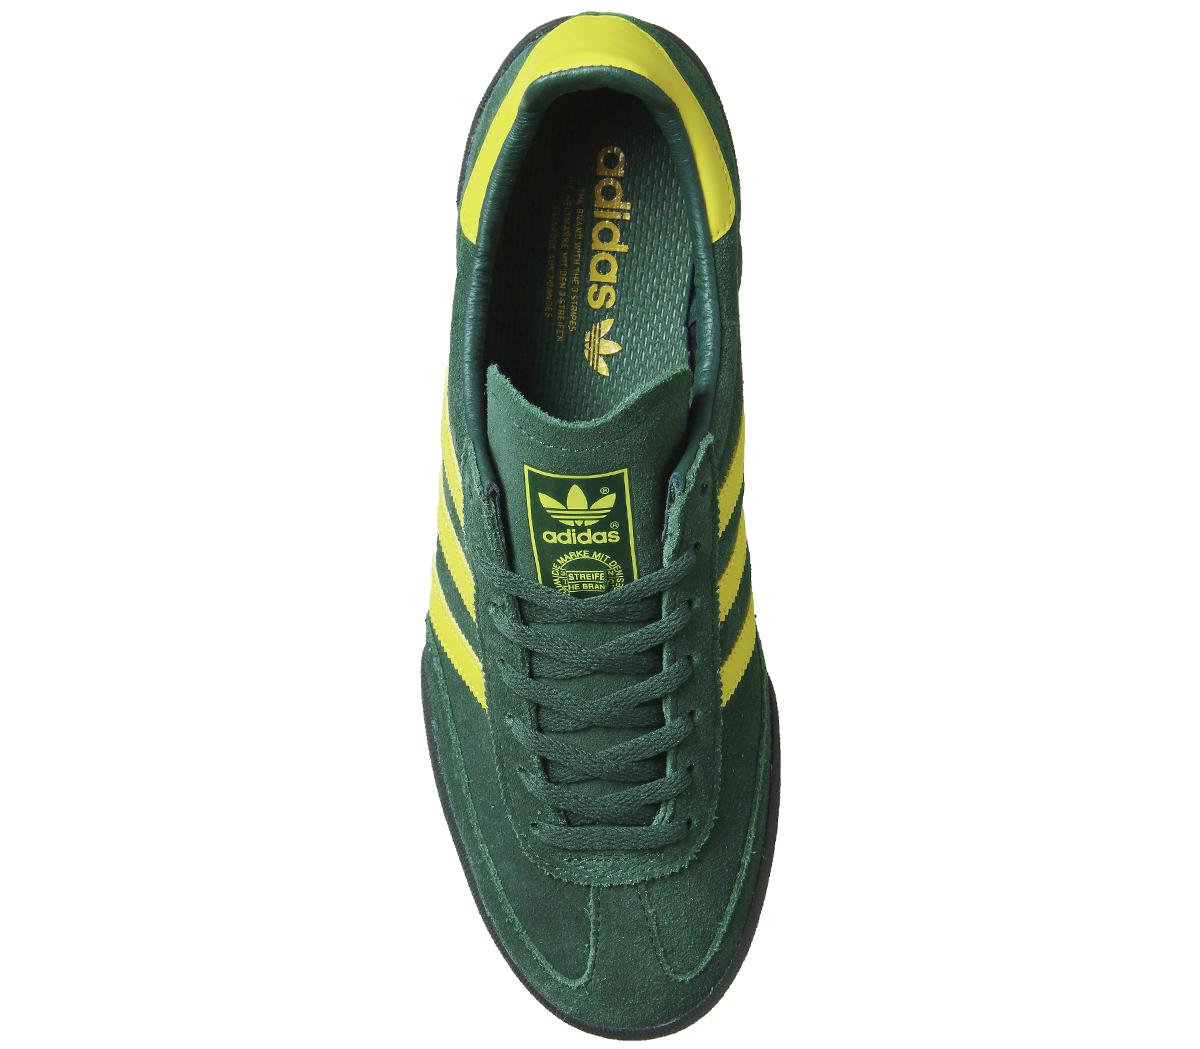 adidas Denim Jeans Trainers in Green for Men - Lyst